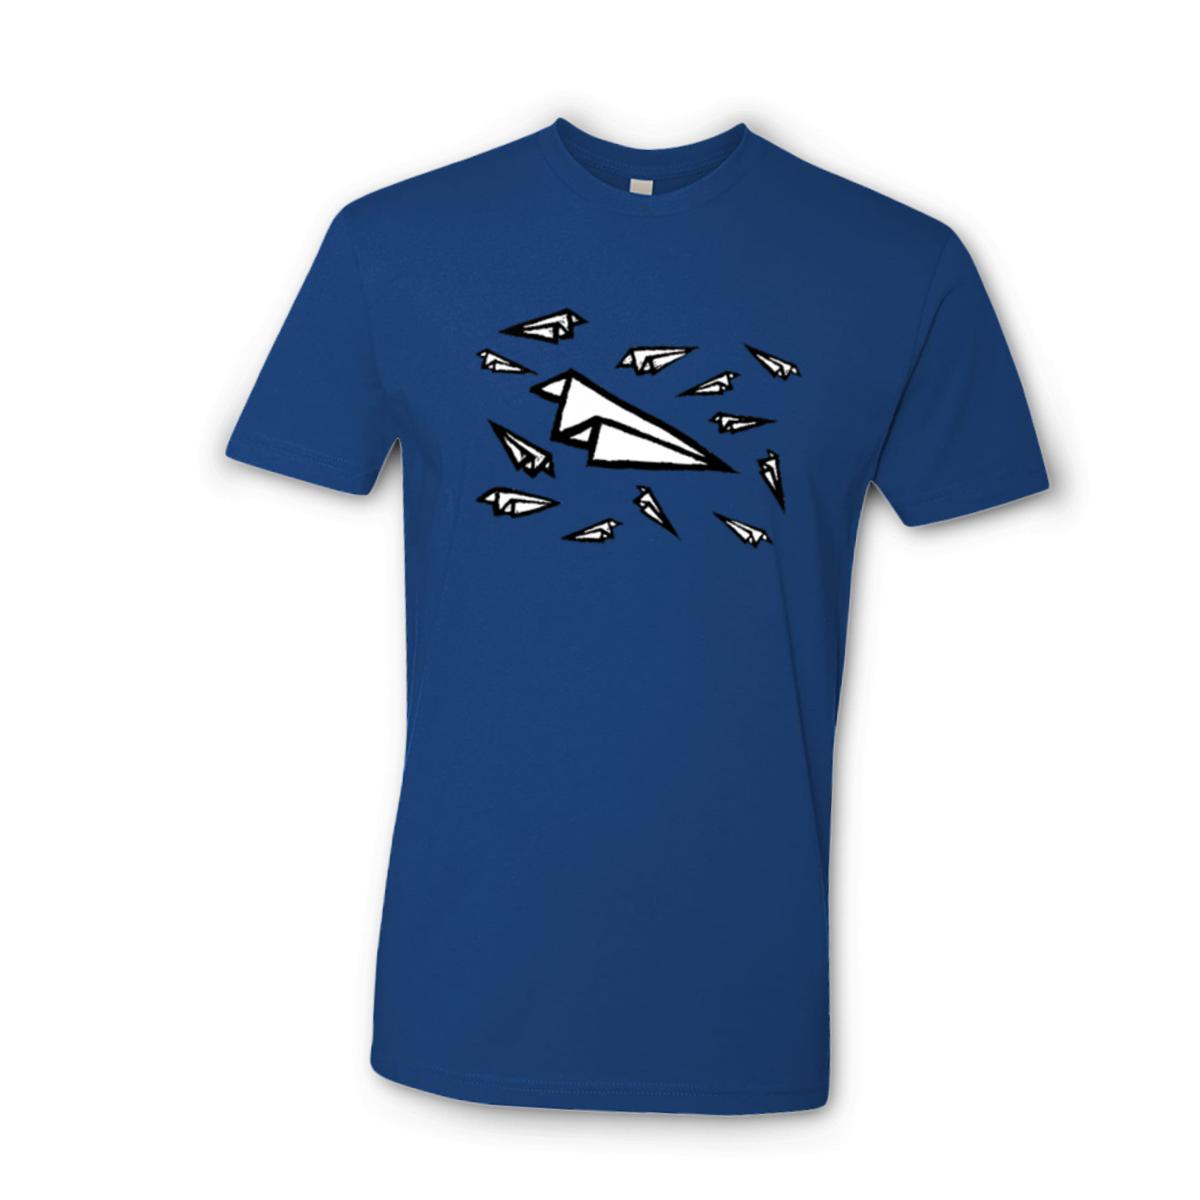 Airplane Frenzy Unisex Tee Small royal-blue